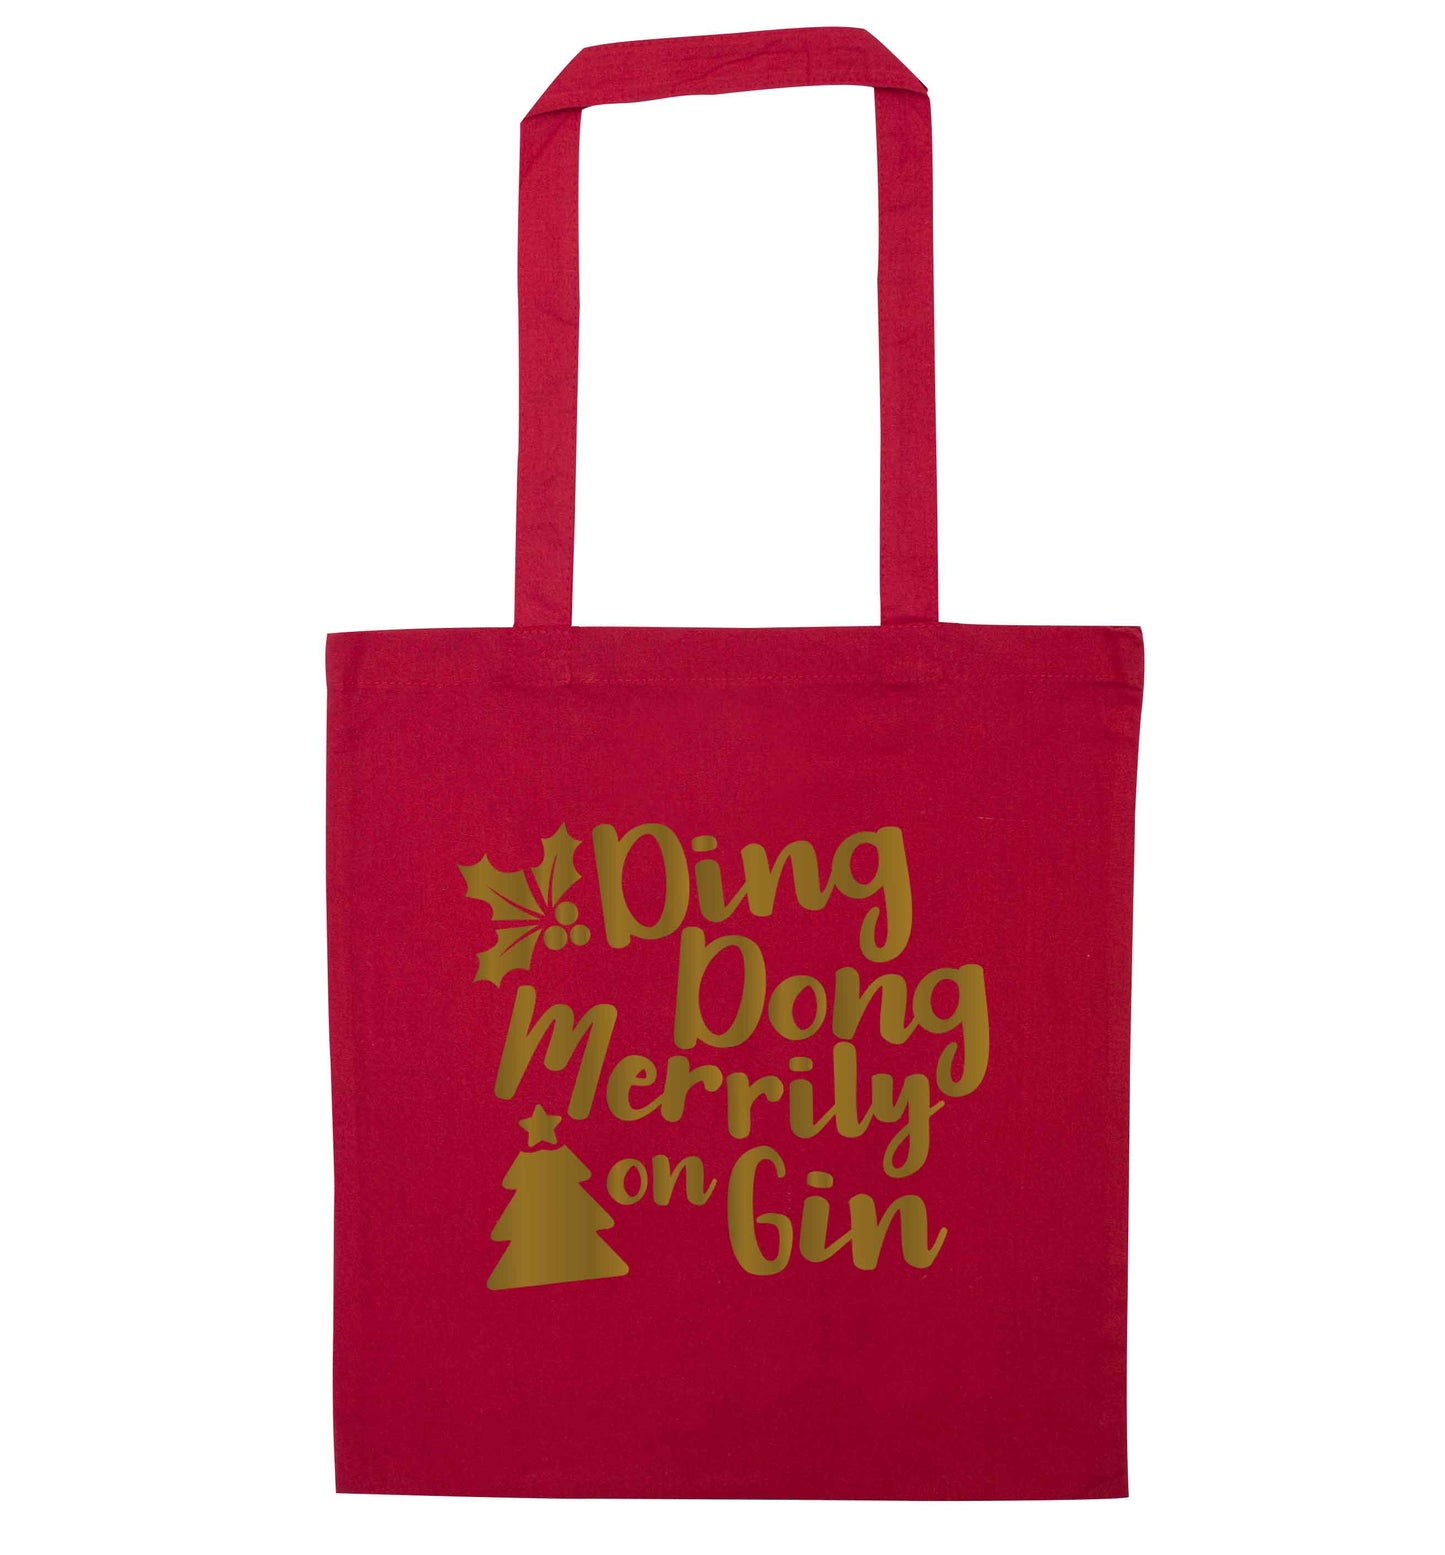 Ding dong merrily on gin red tote bag